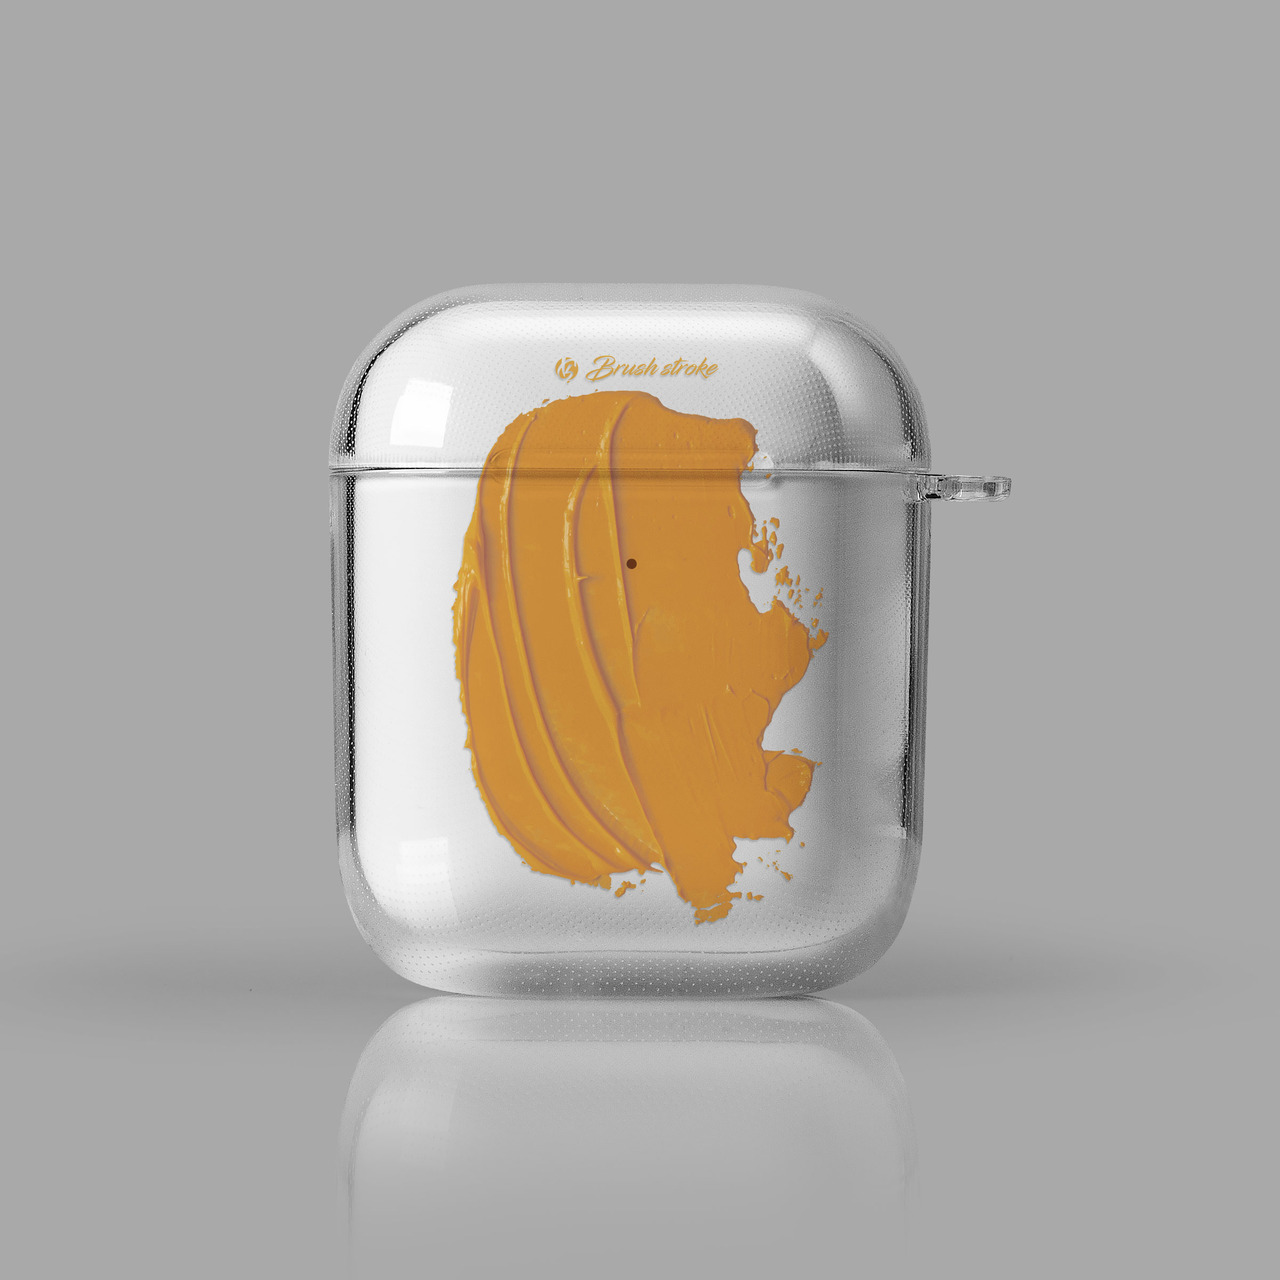 [Airpods cases] Brushstrokes No.10